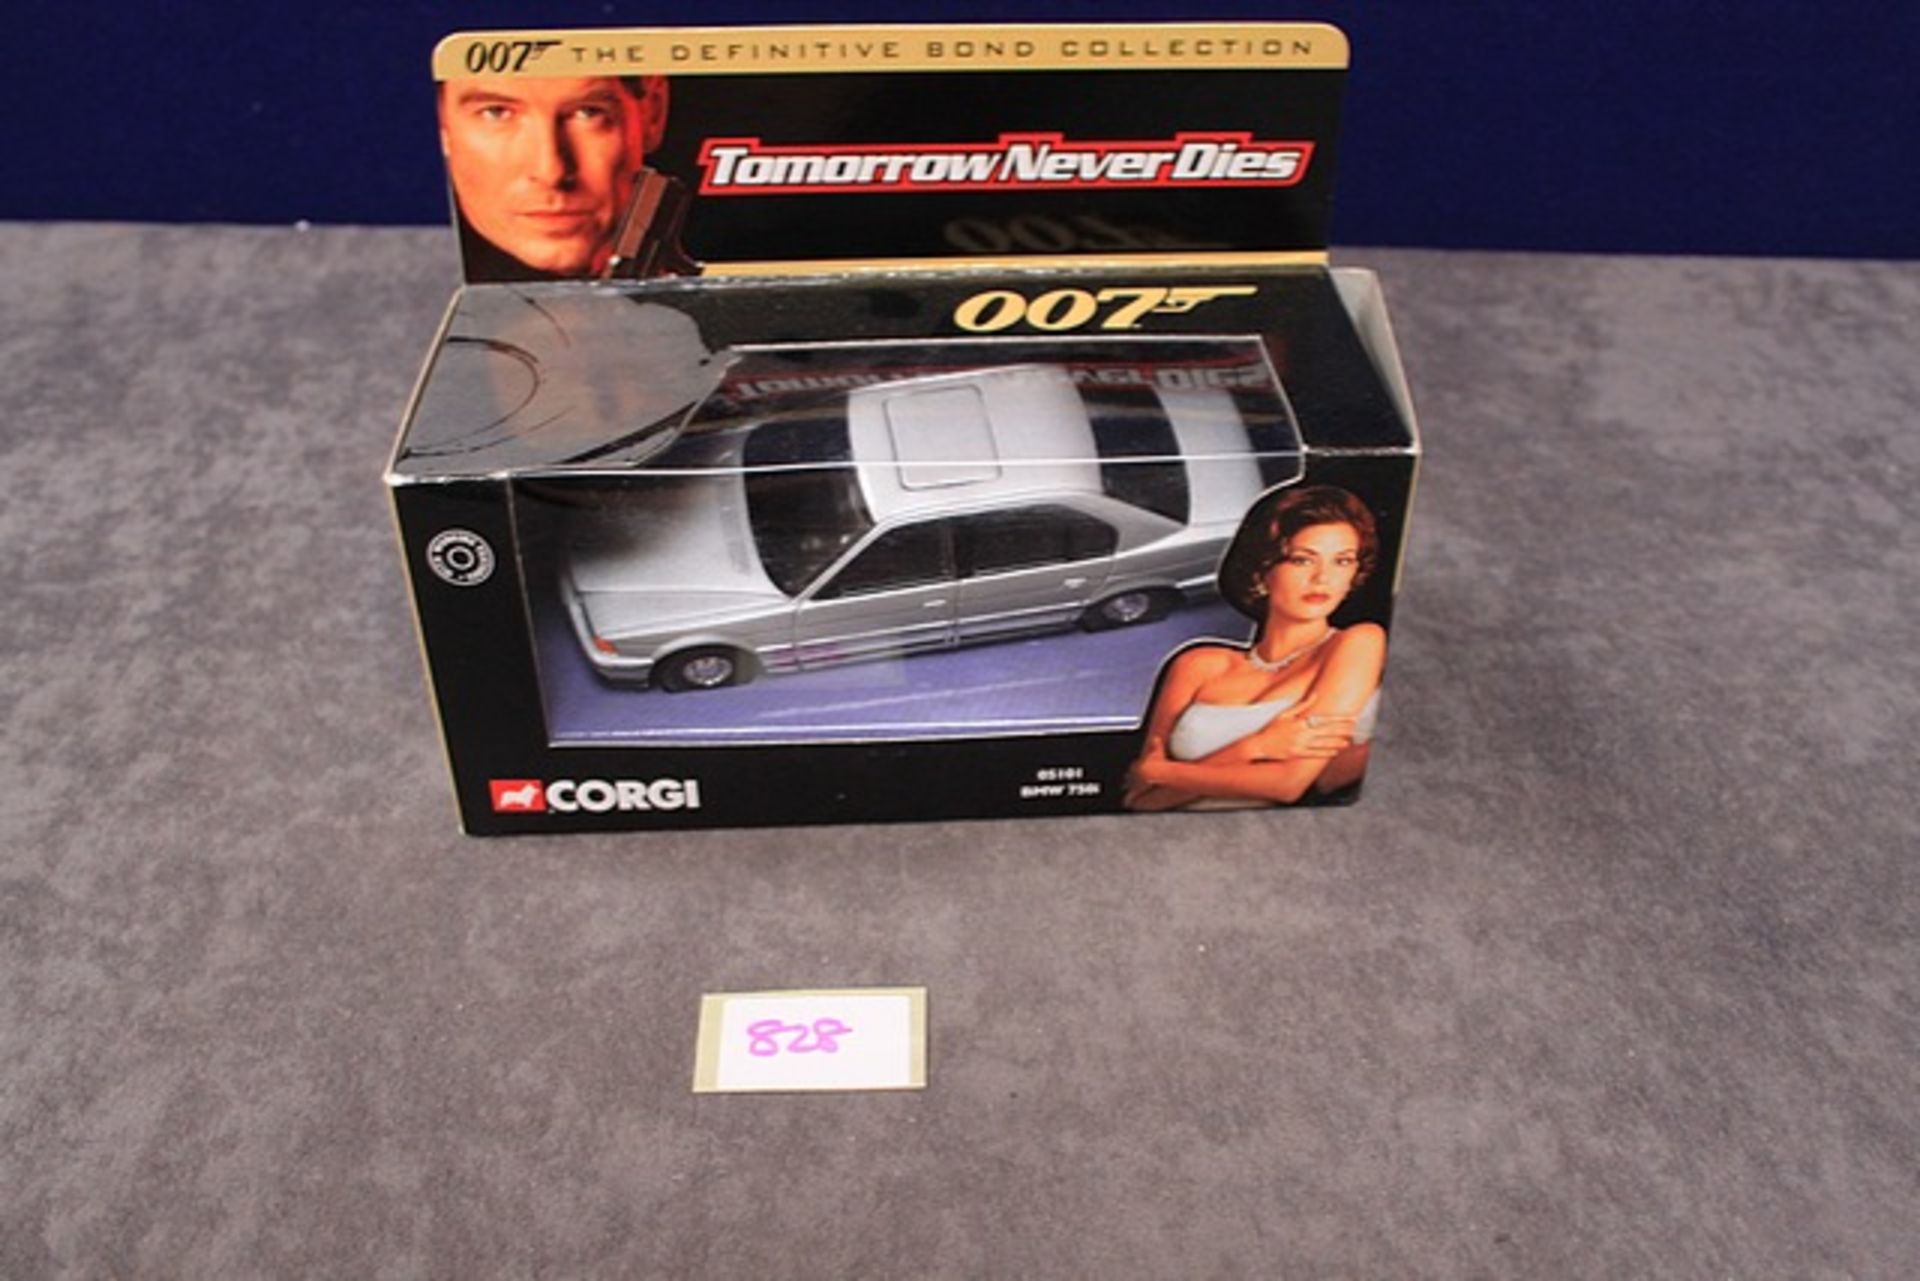 Corgi Diecast 007 The Definitive Bond Collection # 05101 BMW 7650i From Tomorrow Never Dies In Box - Image 2 of 2